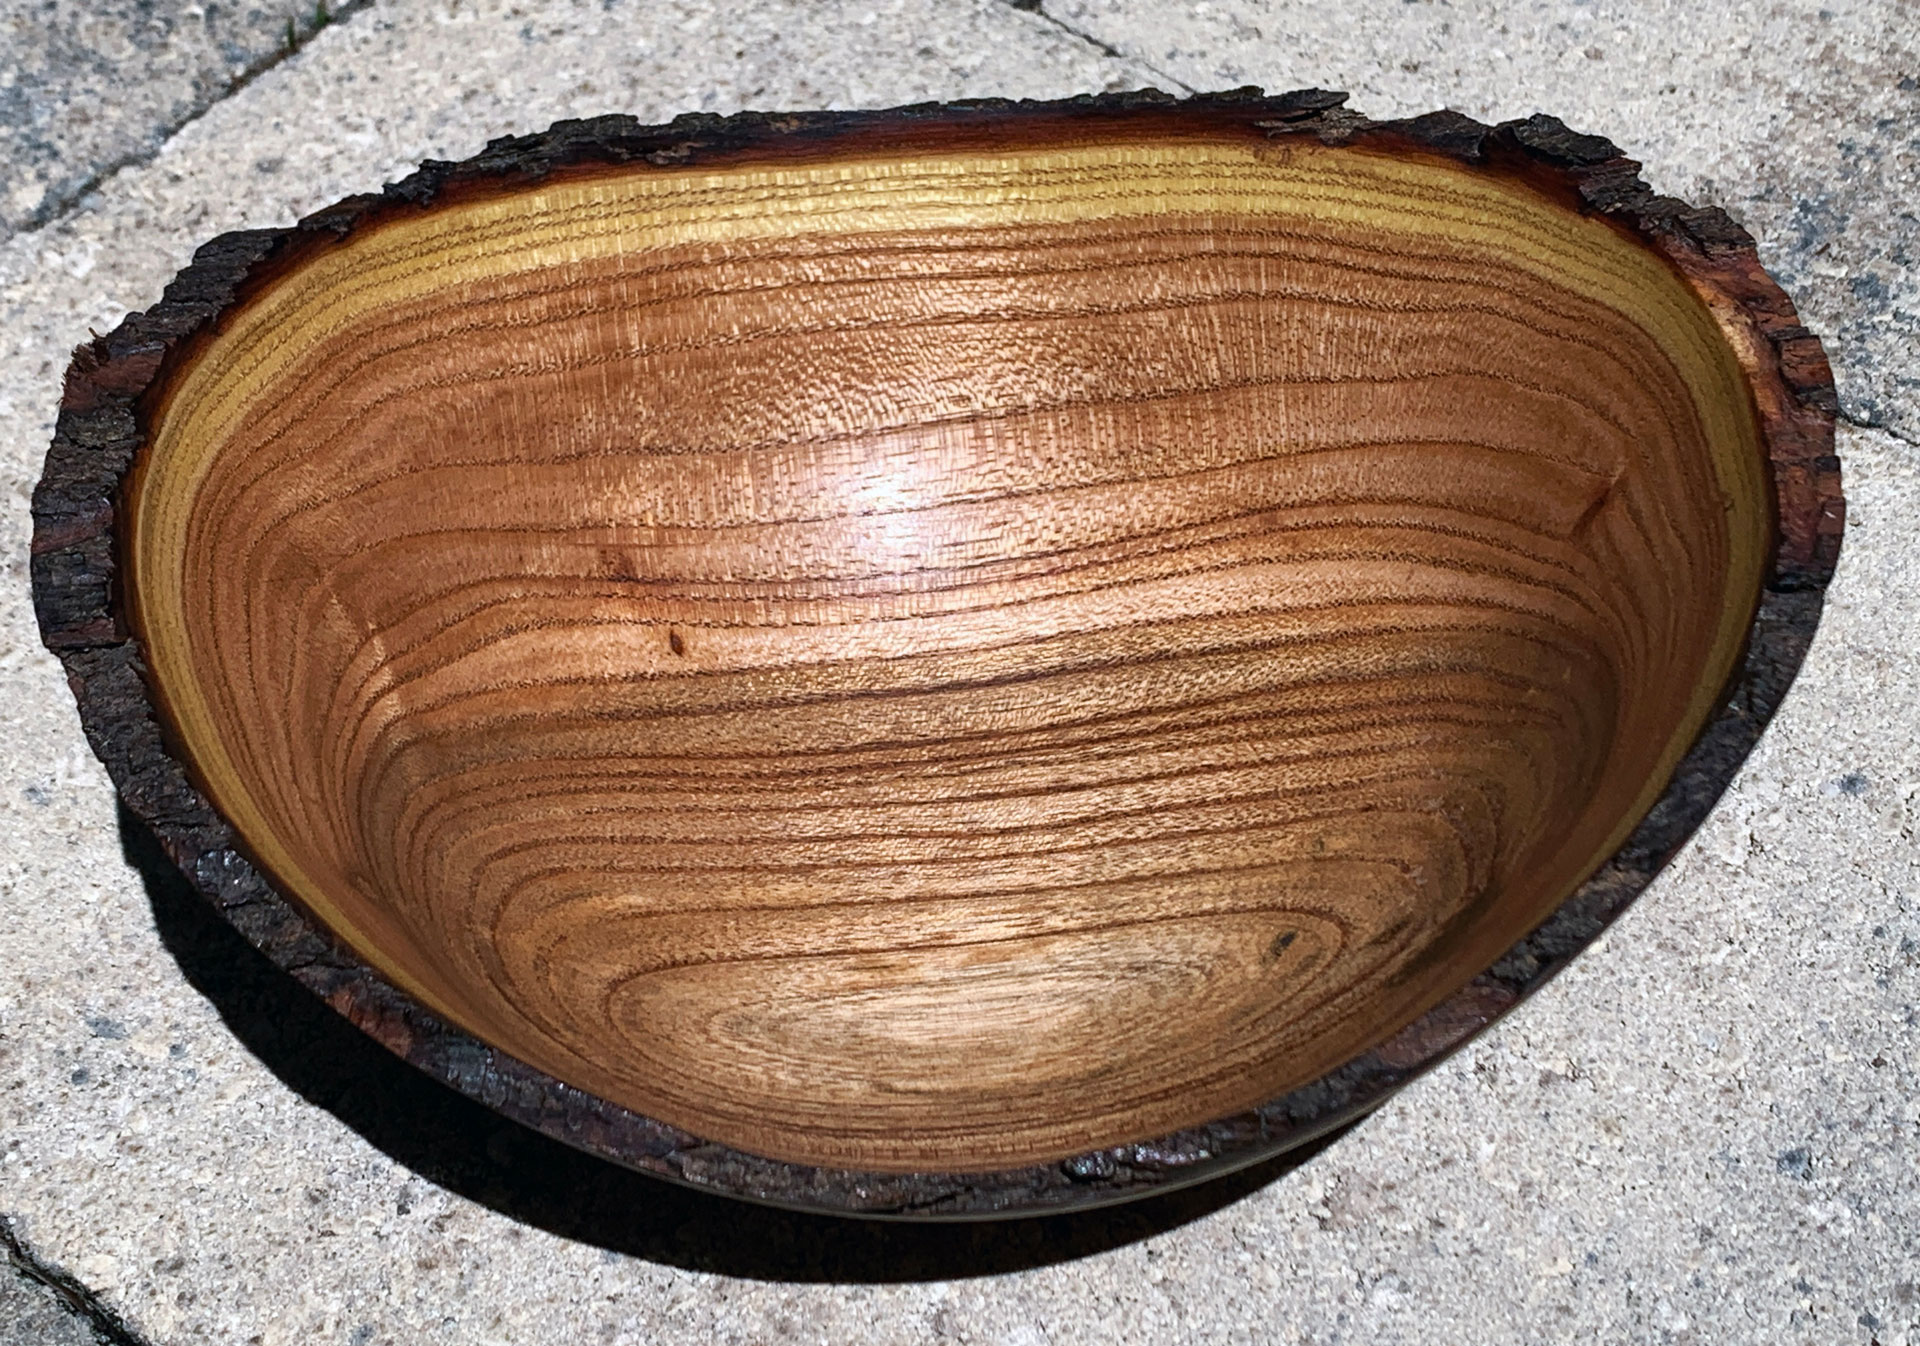 Chinaberry Live Edge Bowl